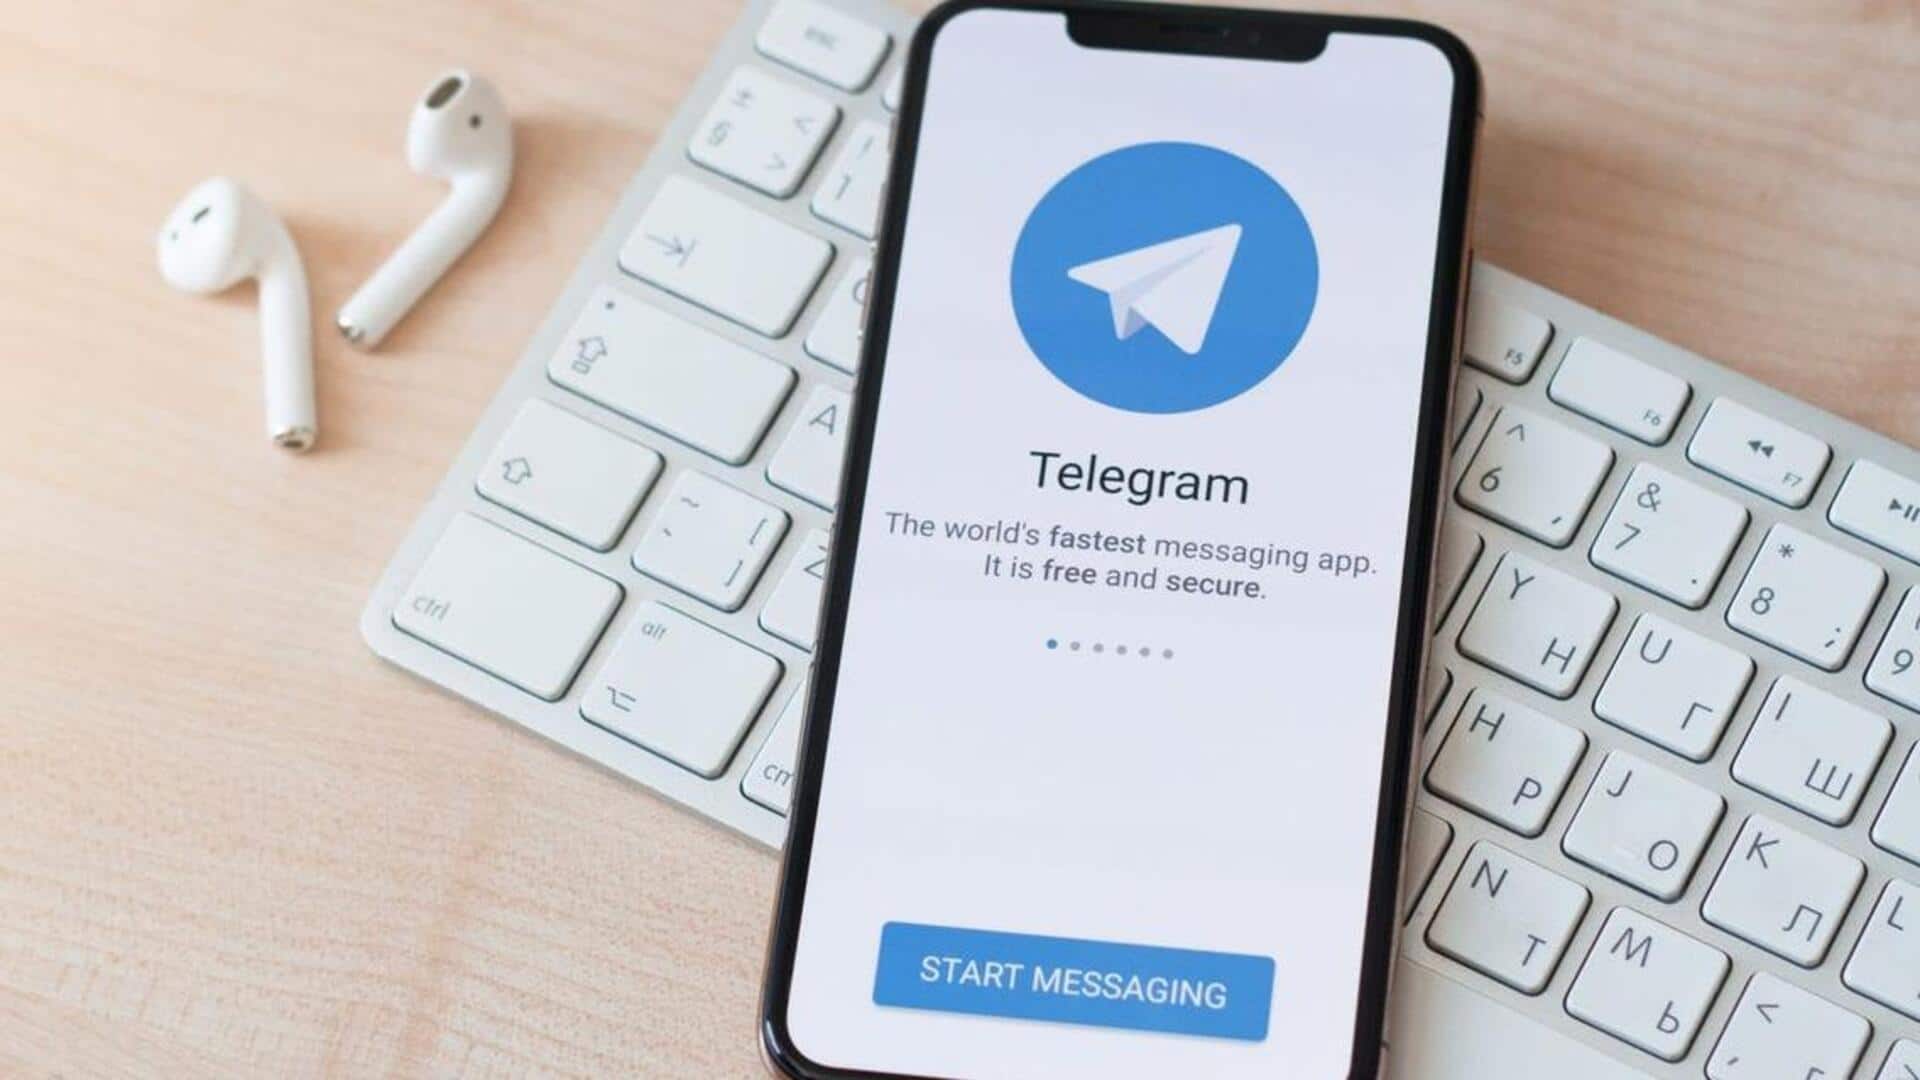 Telegram founder expects it to attain profitability in 2025